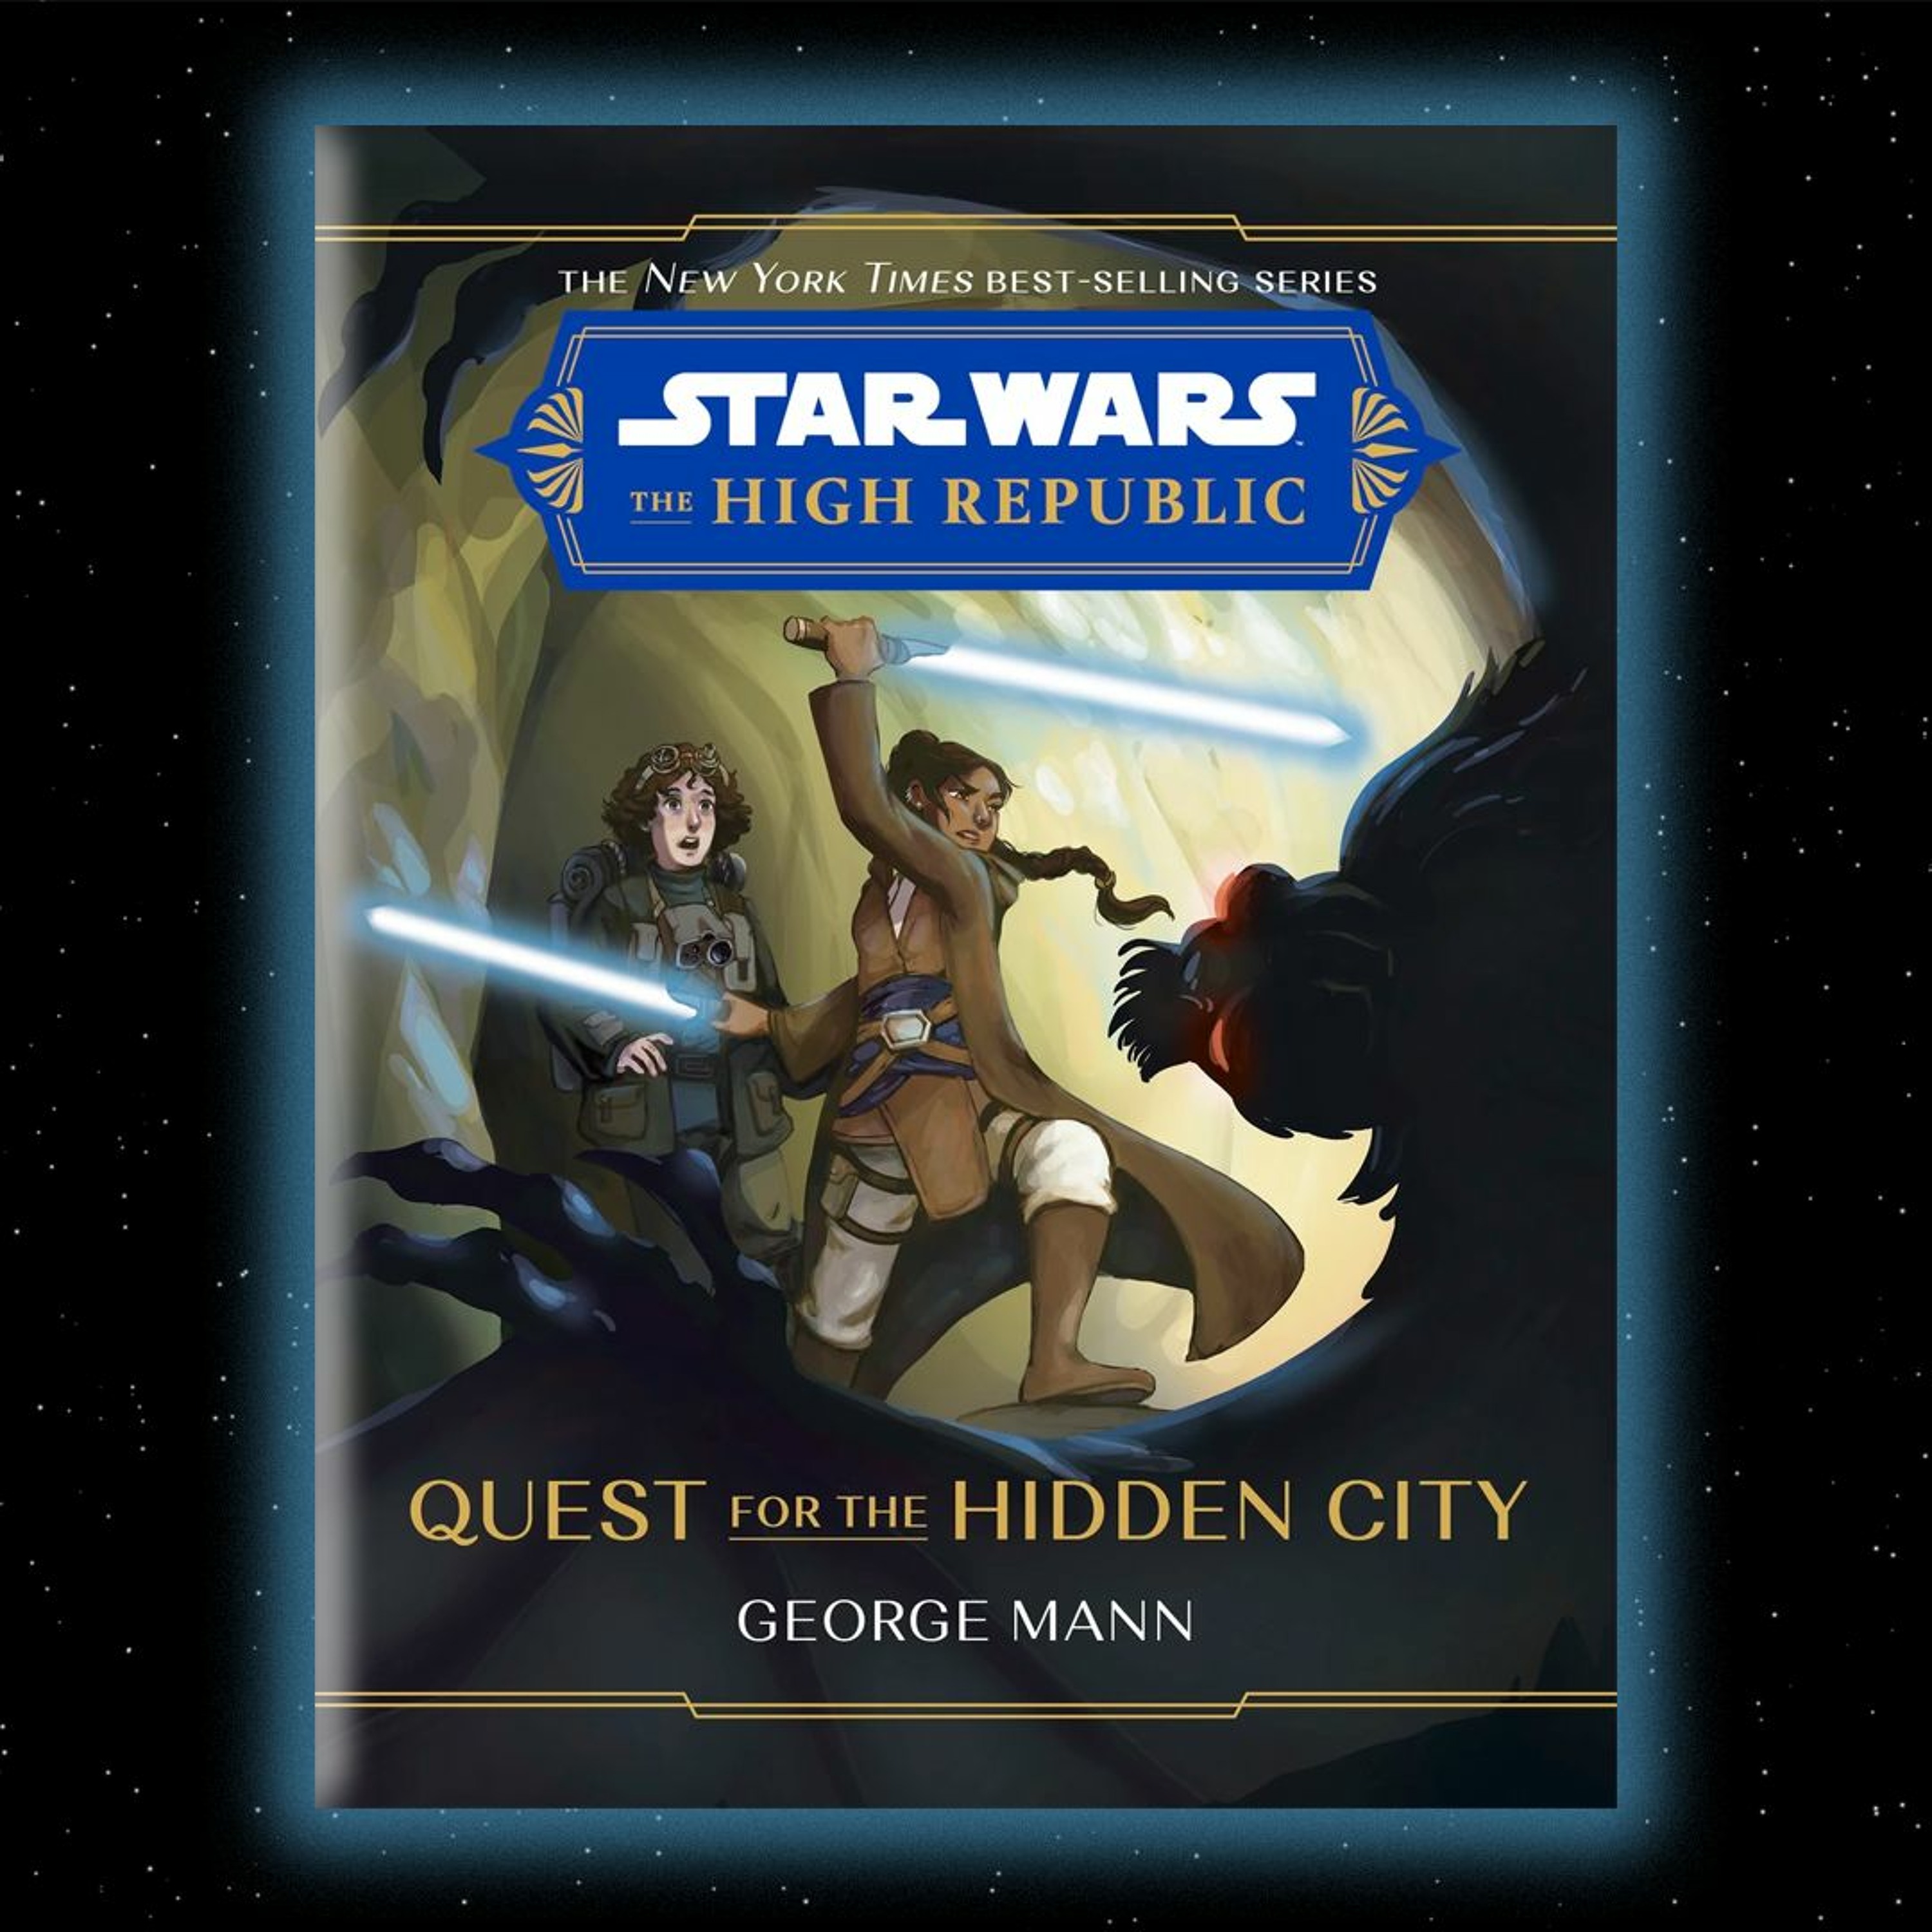 The High Republic: Quest for the Hidden City